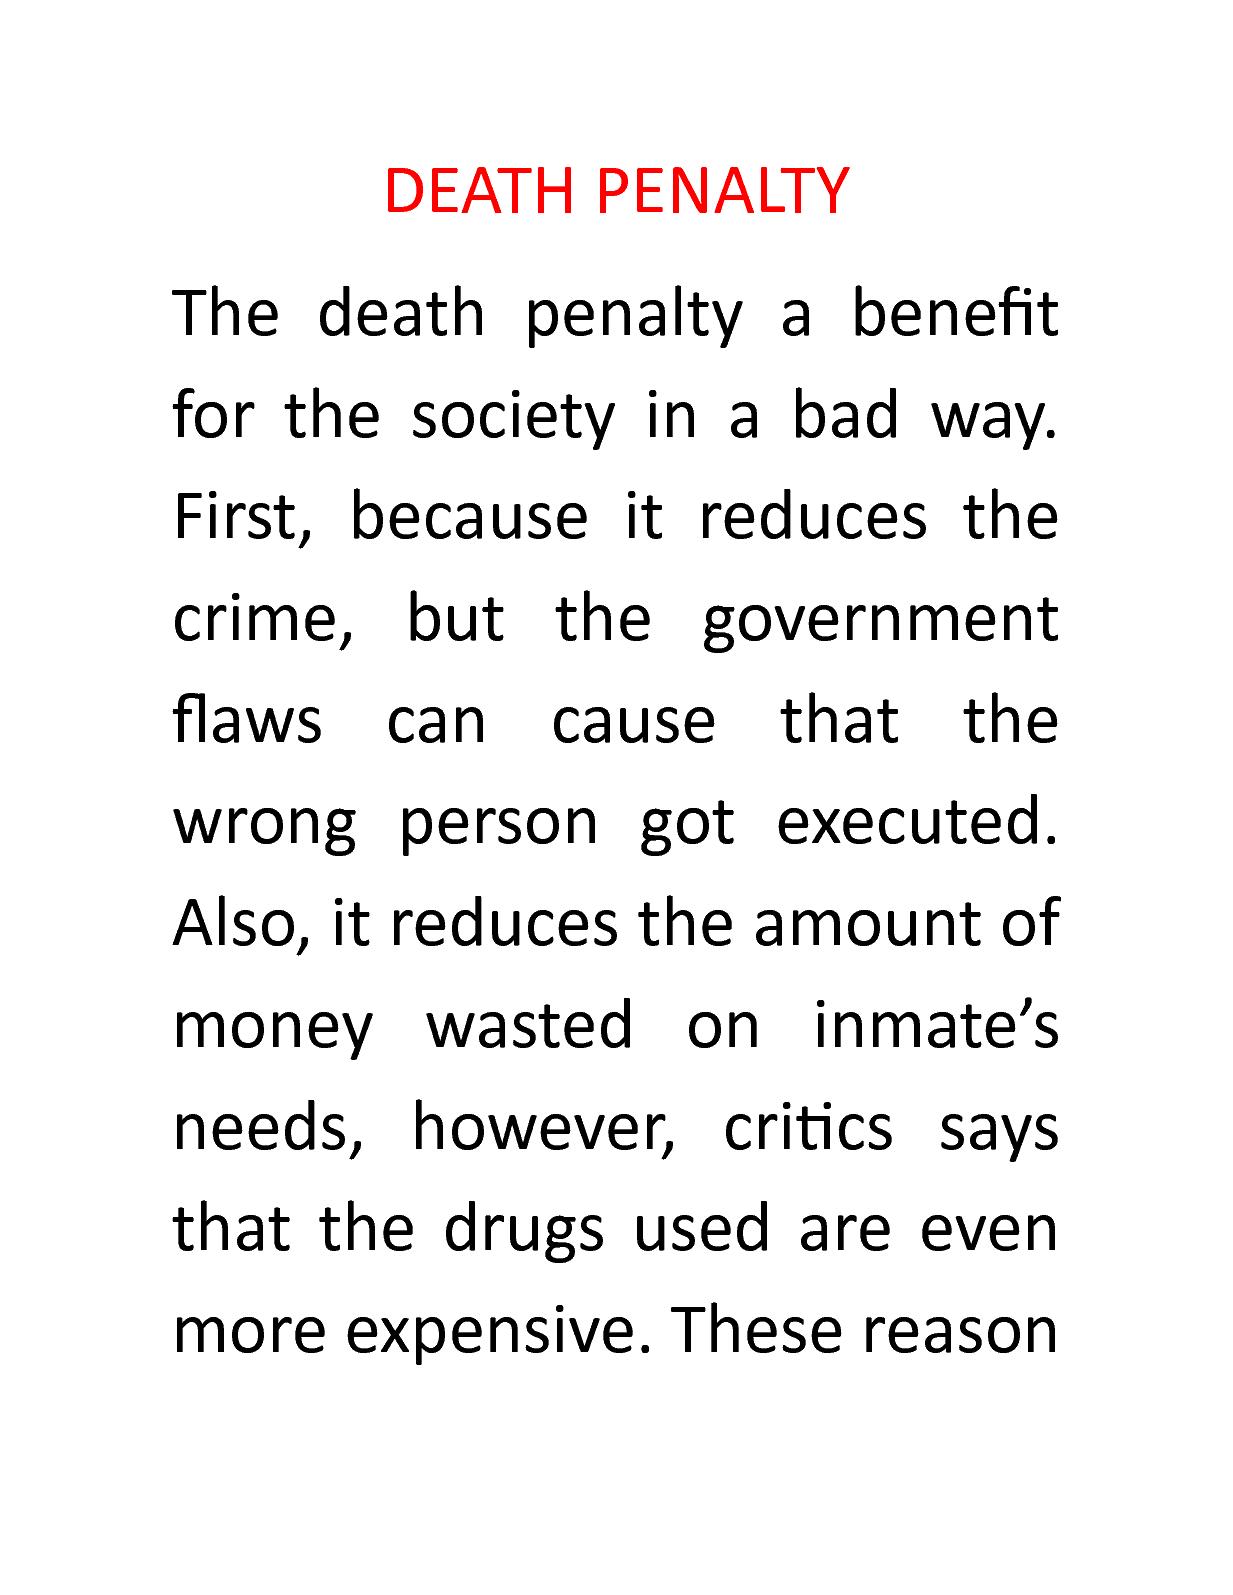 Death penalty in high school papers